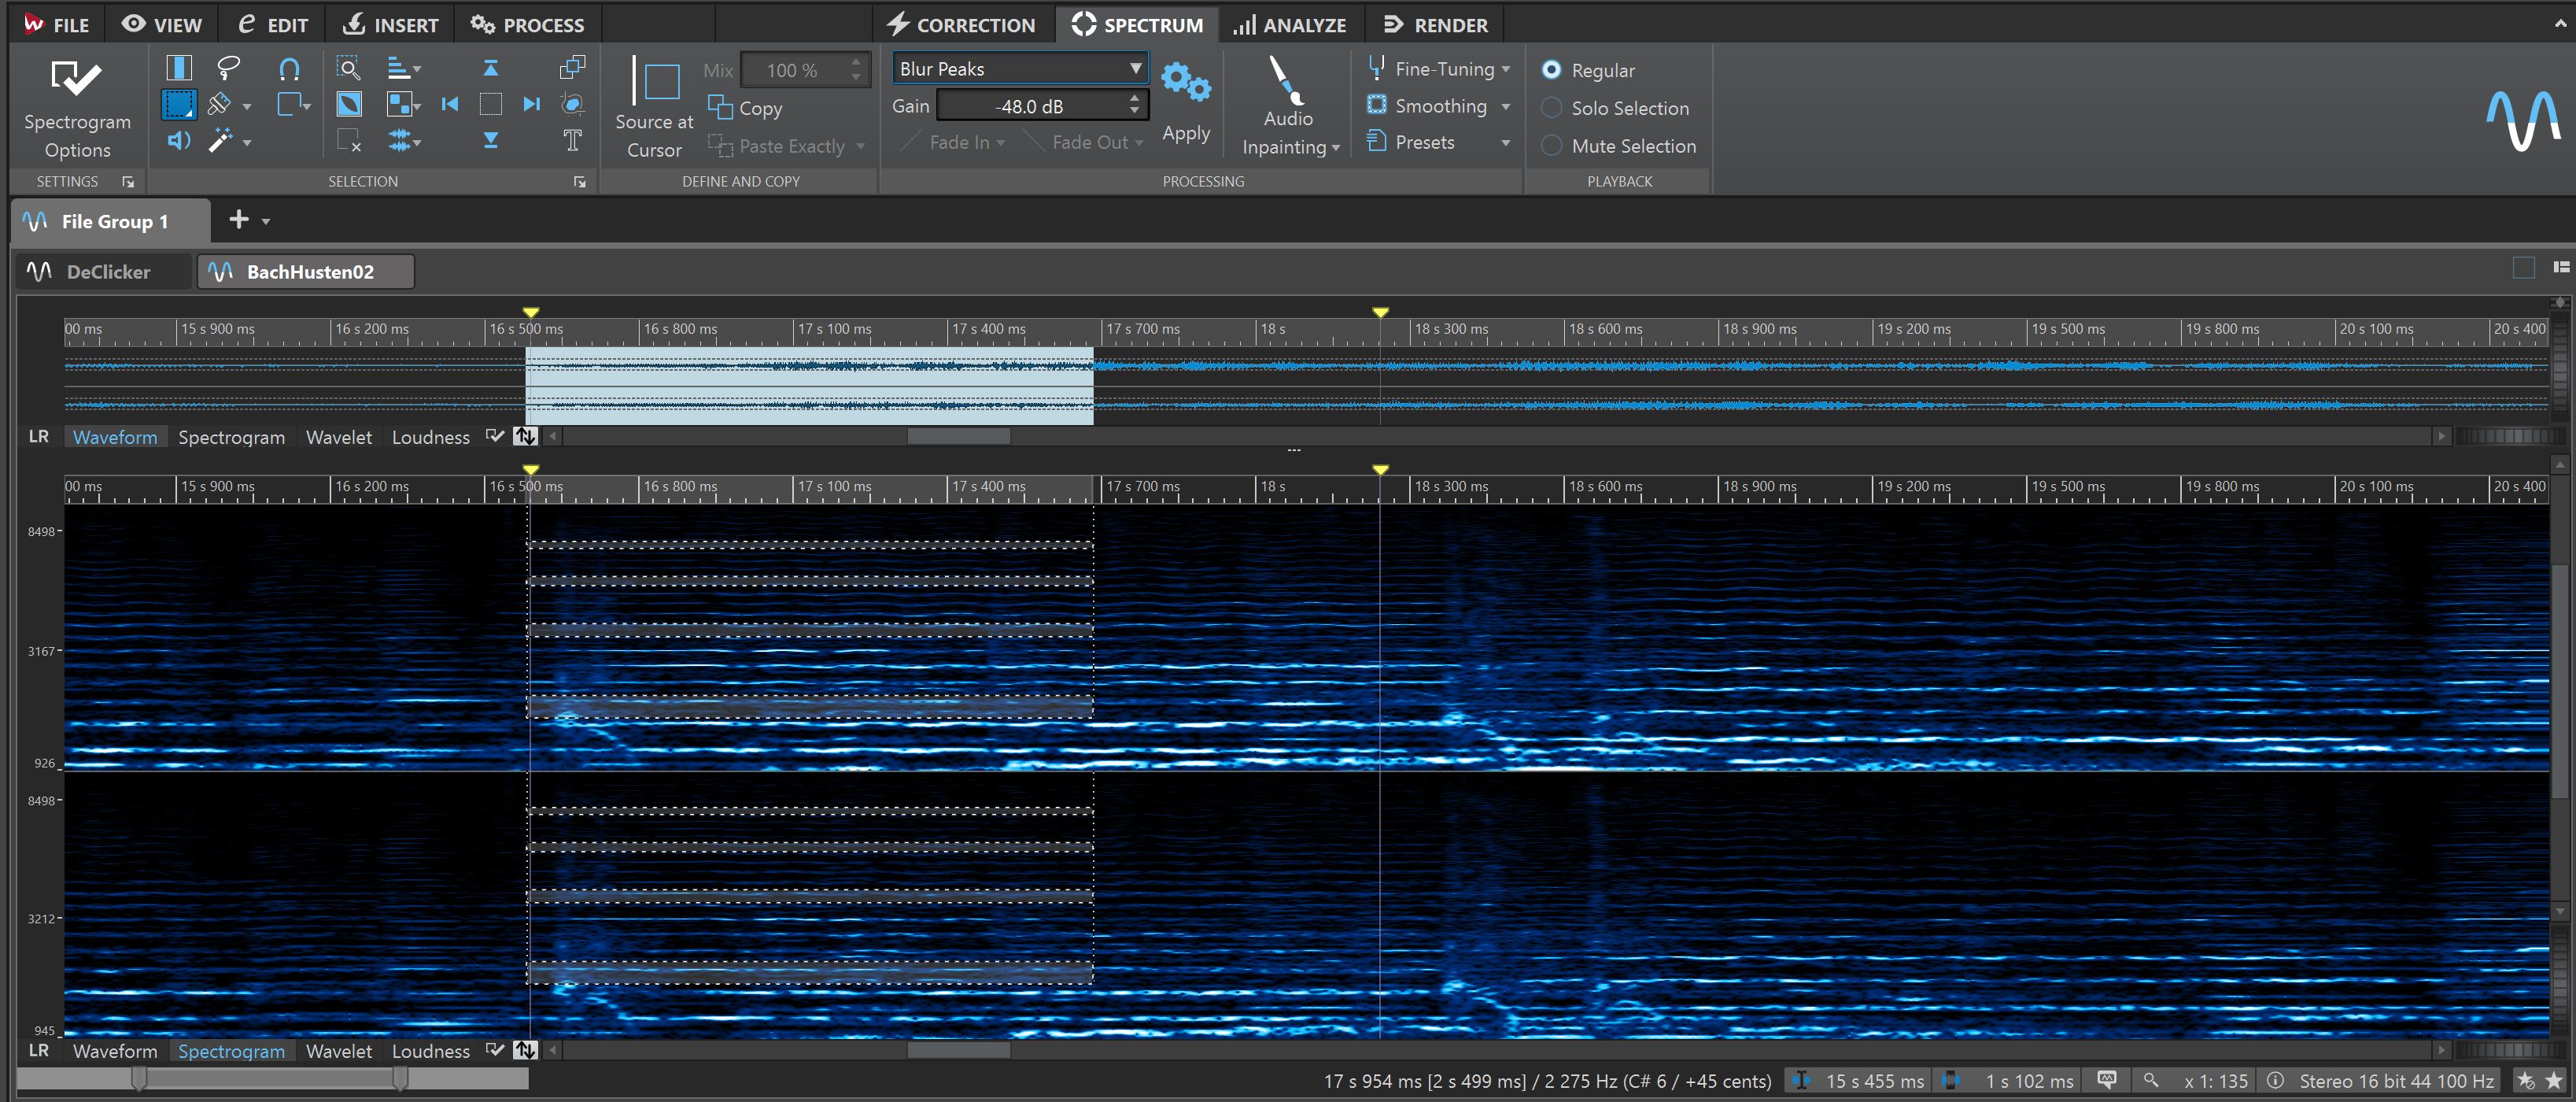 steinberg wavelab elements 9.5 compared to pro 9.56